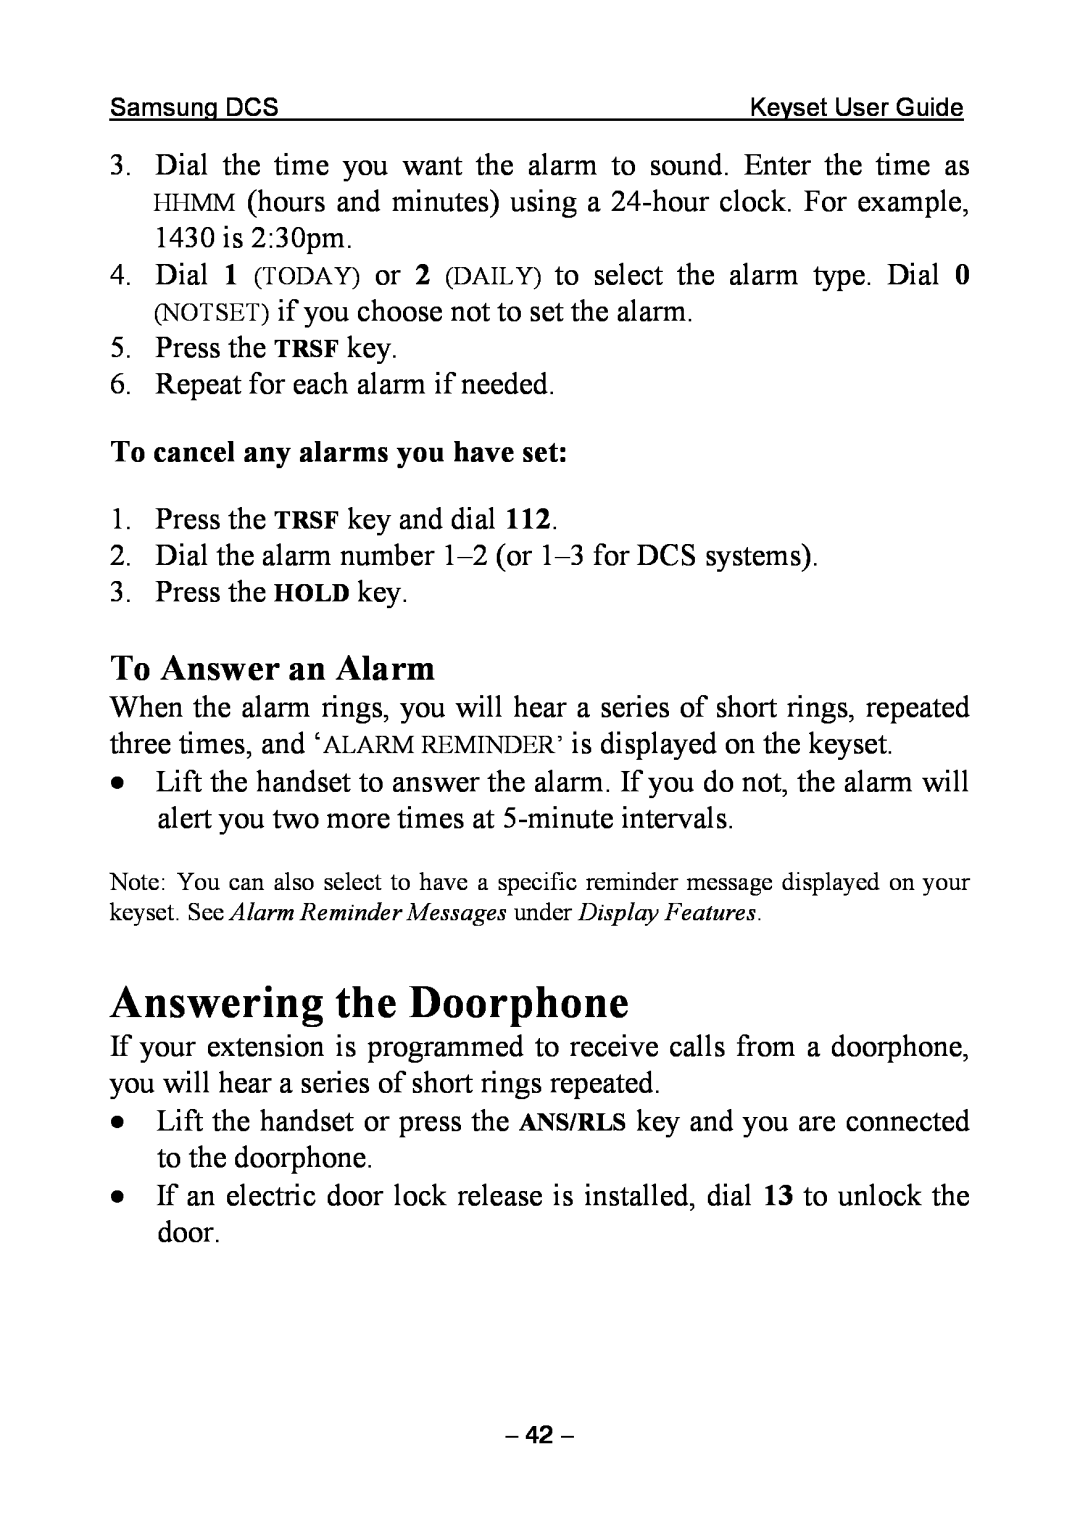 Samsung DCS KEYSET manual Answering the Doorphone, To Answer an Alarm, To cancel any alarms you have set 